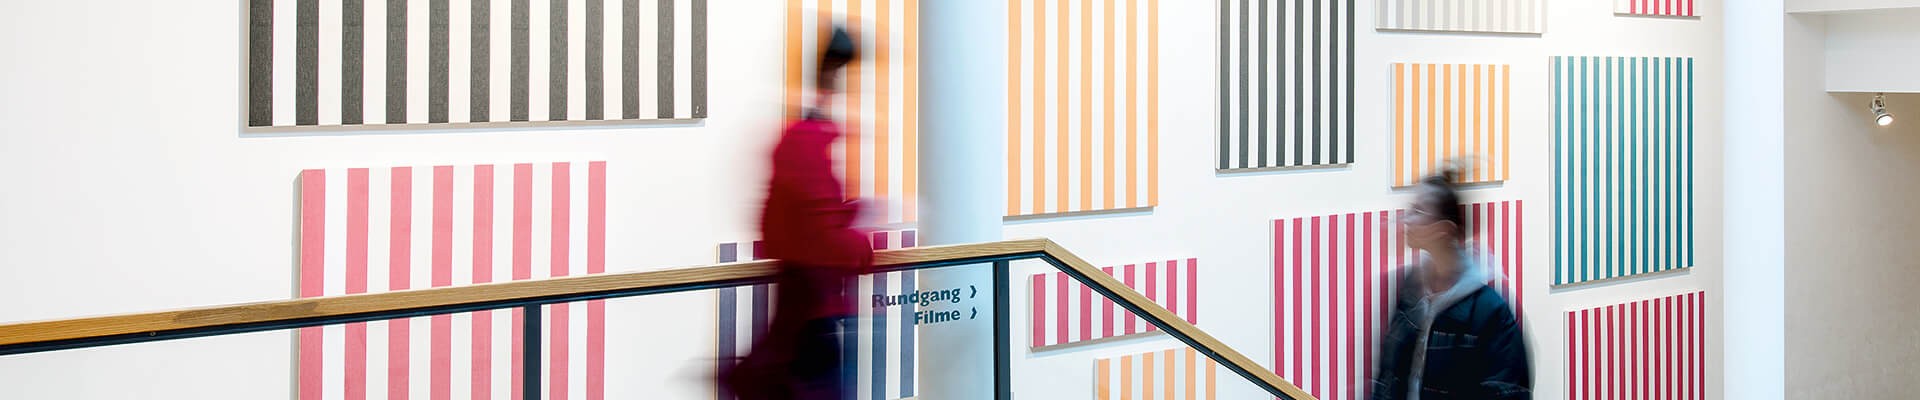 Highlight of the 2019 exhibition season: art from Paris - visiting Kunsthalle Würth, such as Daniel Buren’s Wall of Paintings, shown here. Around 200 masterpieces “From Henri Matisse to Louise Bourgeois”  won the hearts of more than 142,000 art connoisseurs.